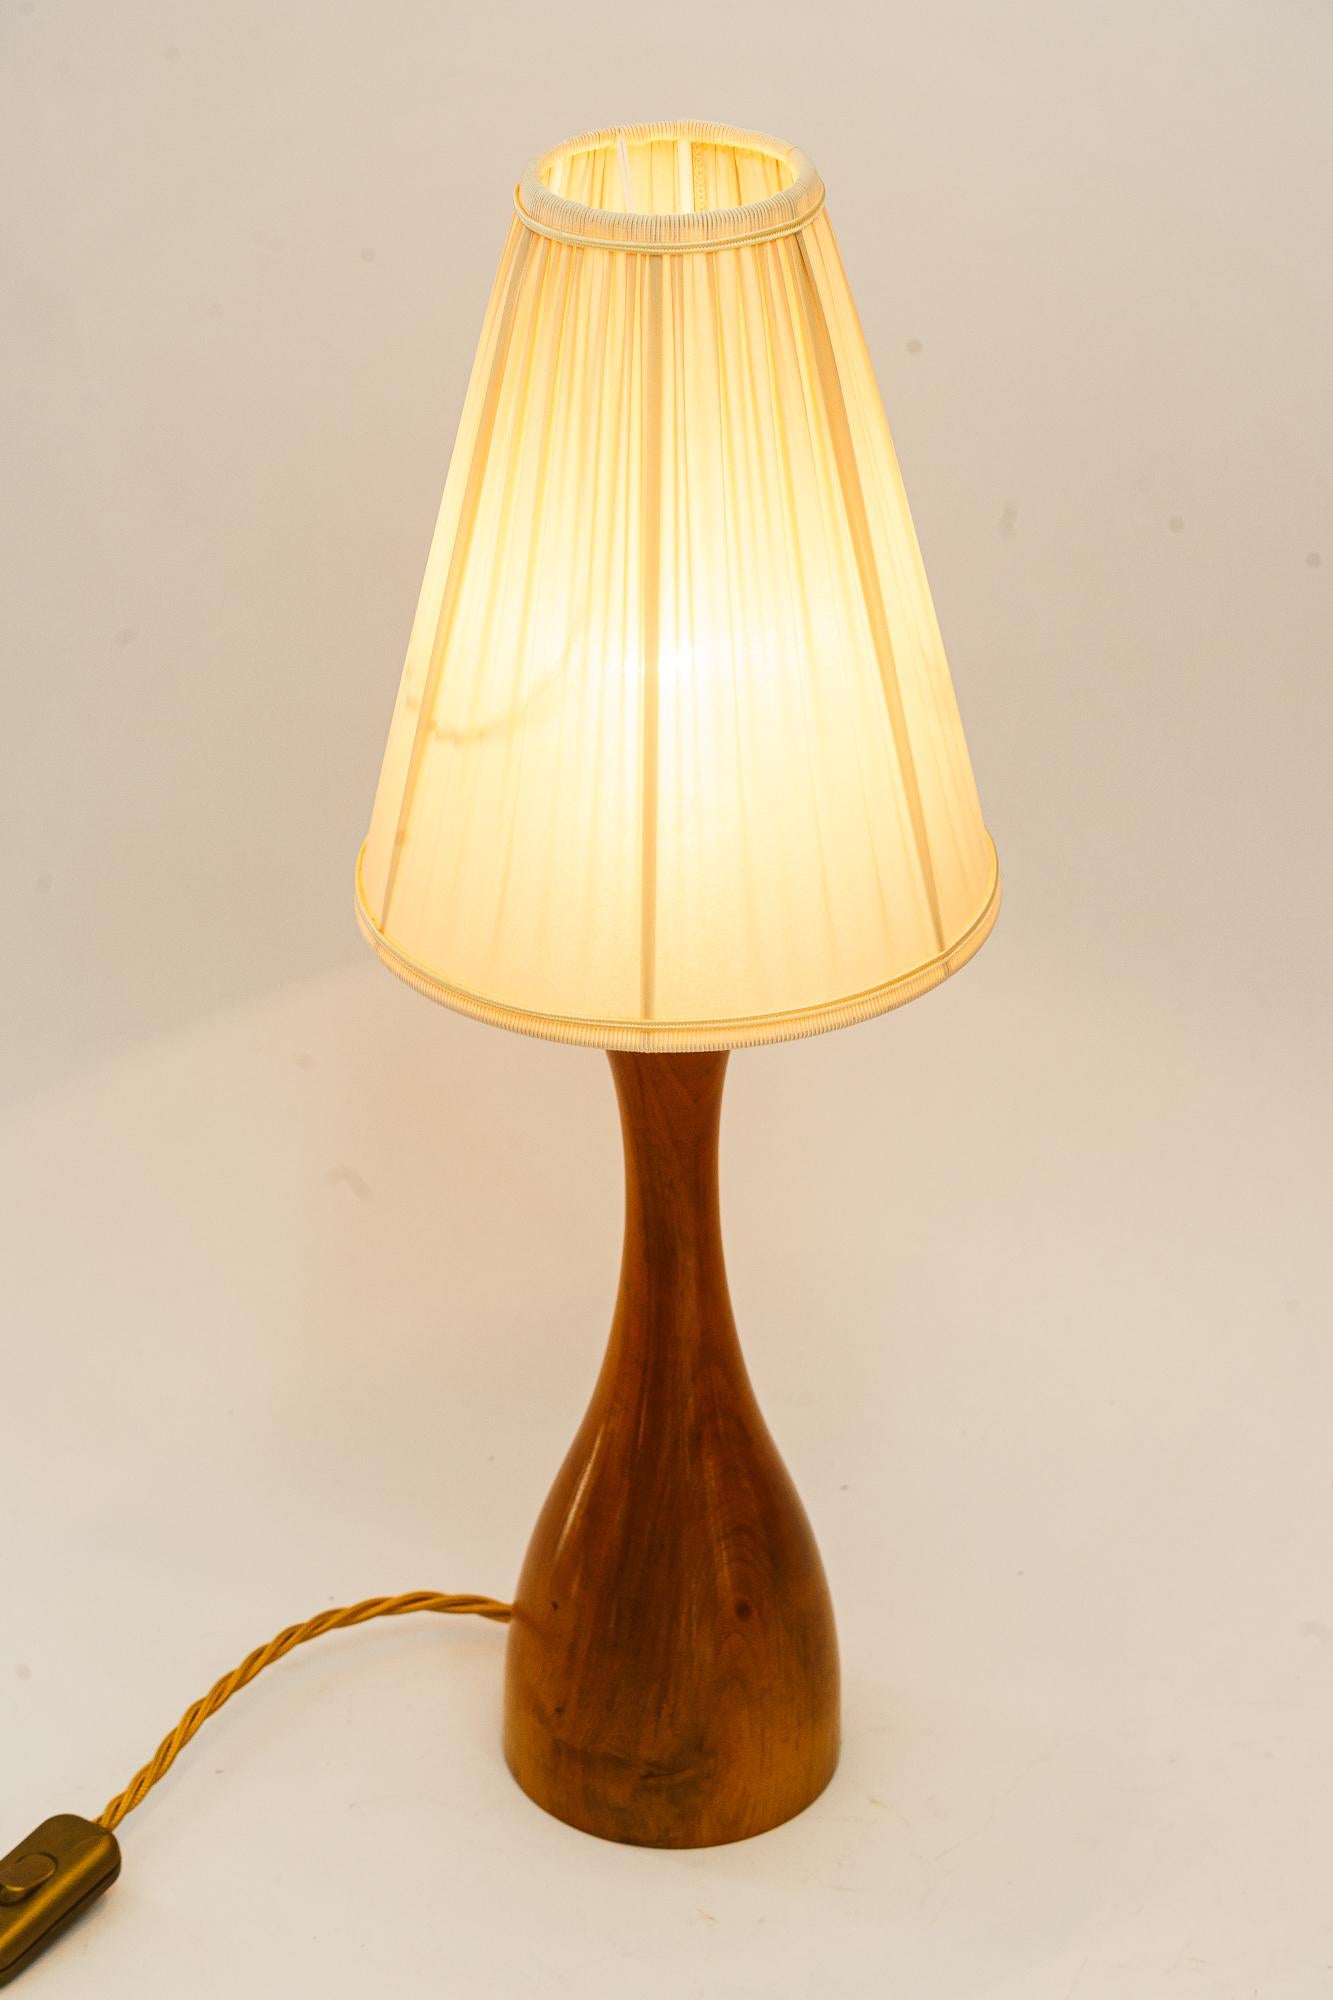 Brass Rupert Nikoll cerry wood table lamp with fabric shade vienna around 1950s